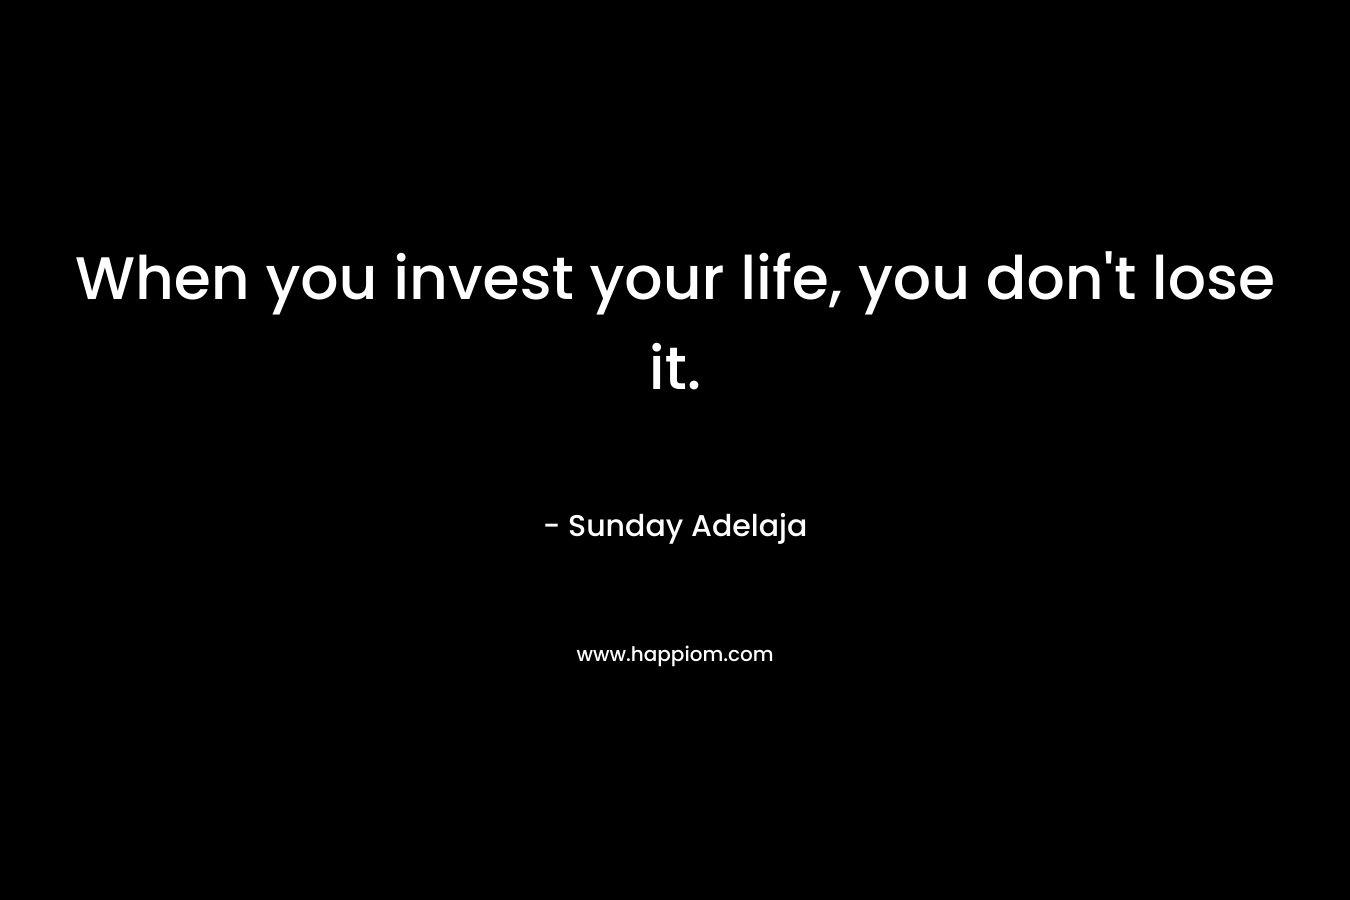 When you invest your life, you don't lose it.